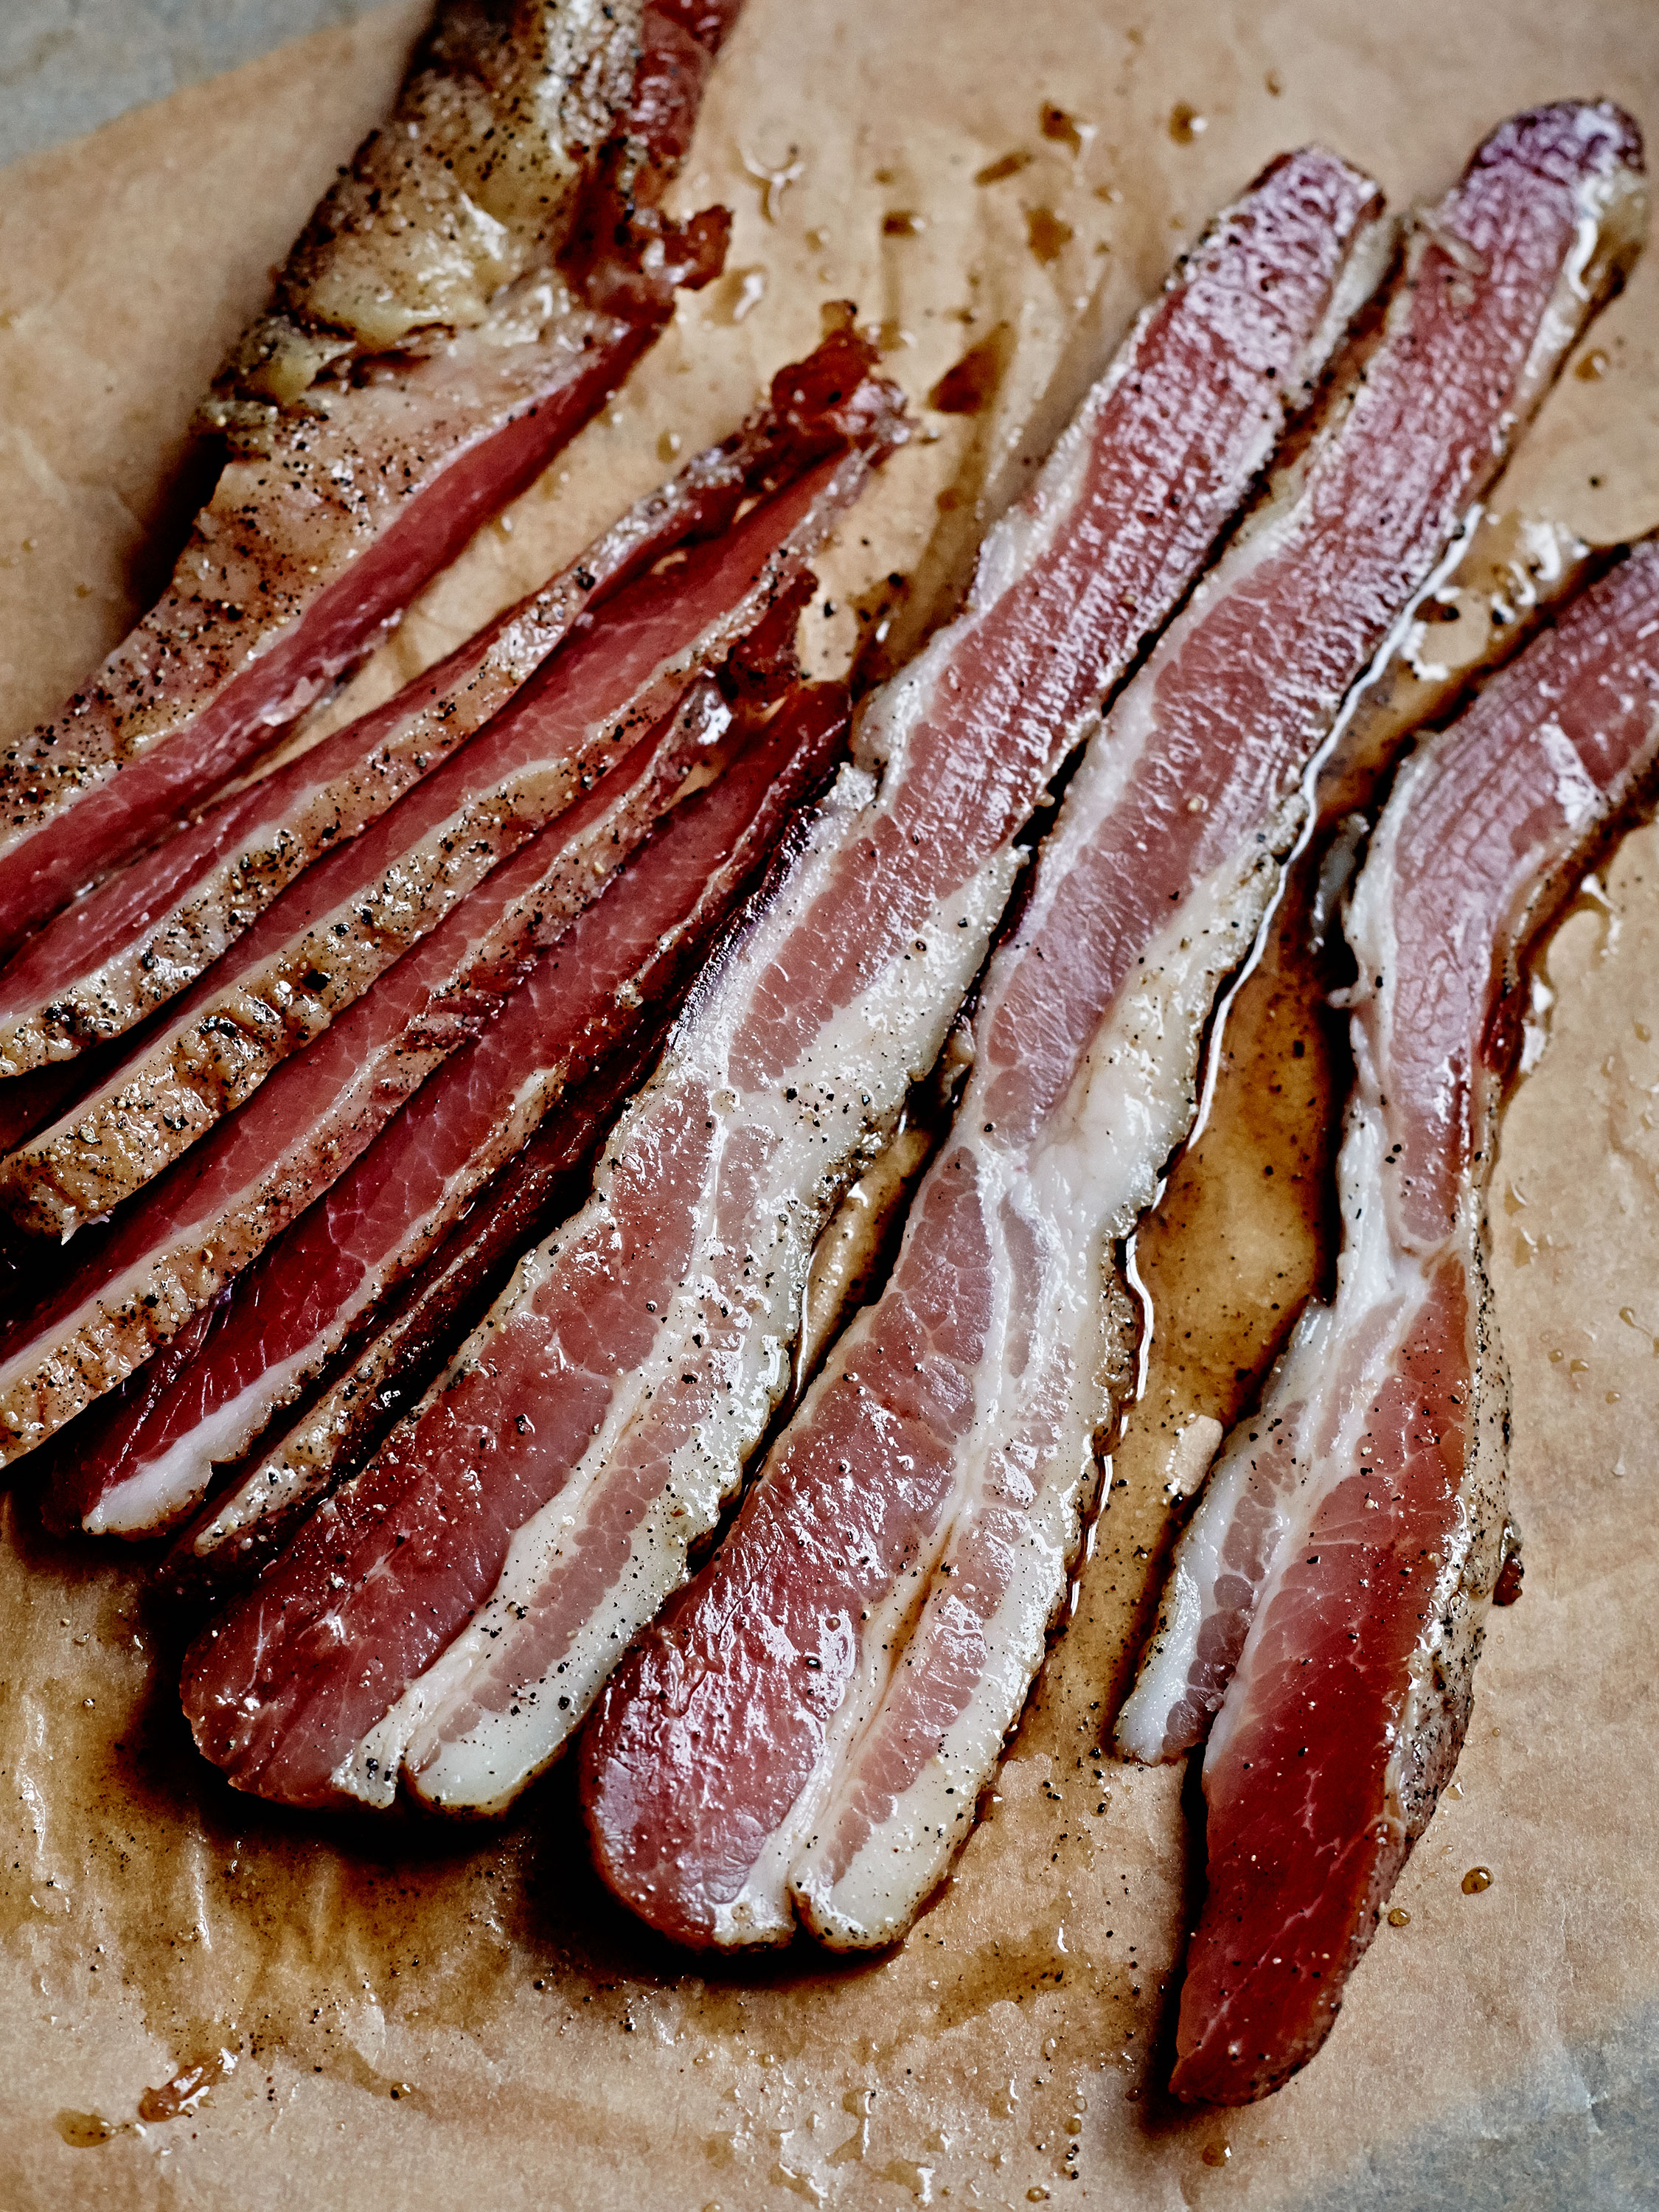 Can I Use Bacon Fat Instead of Lard?